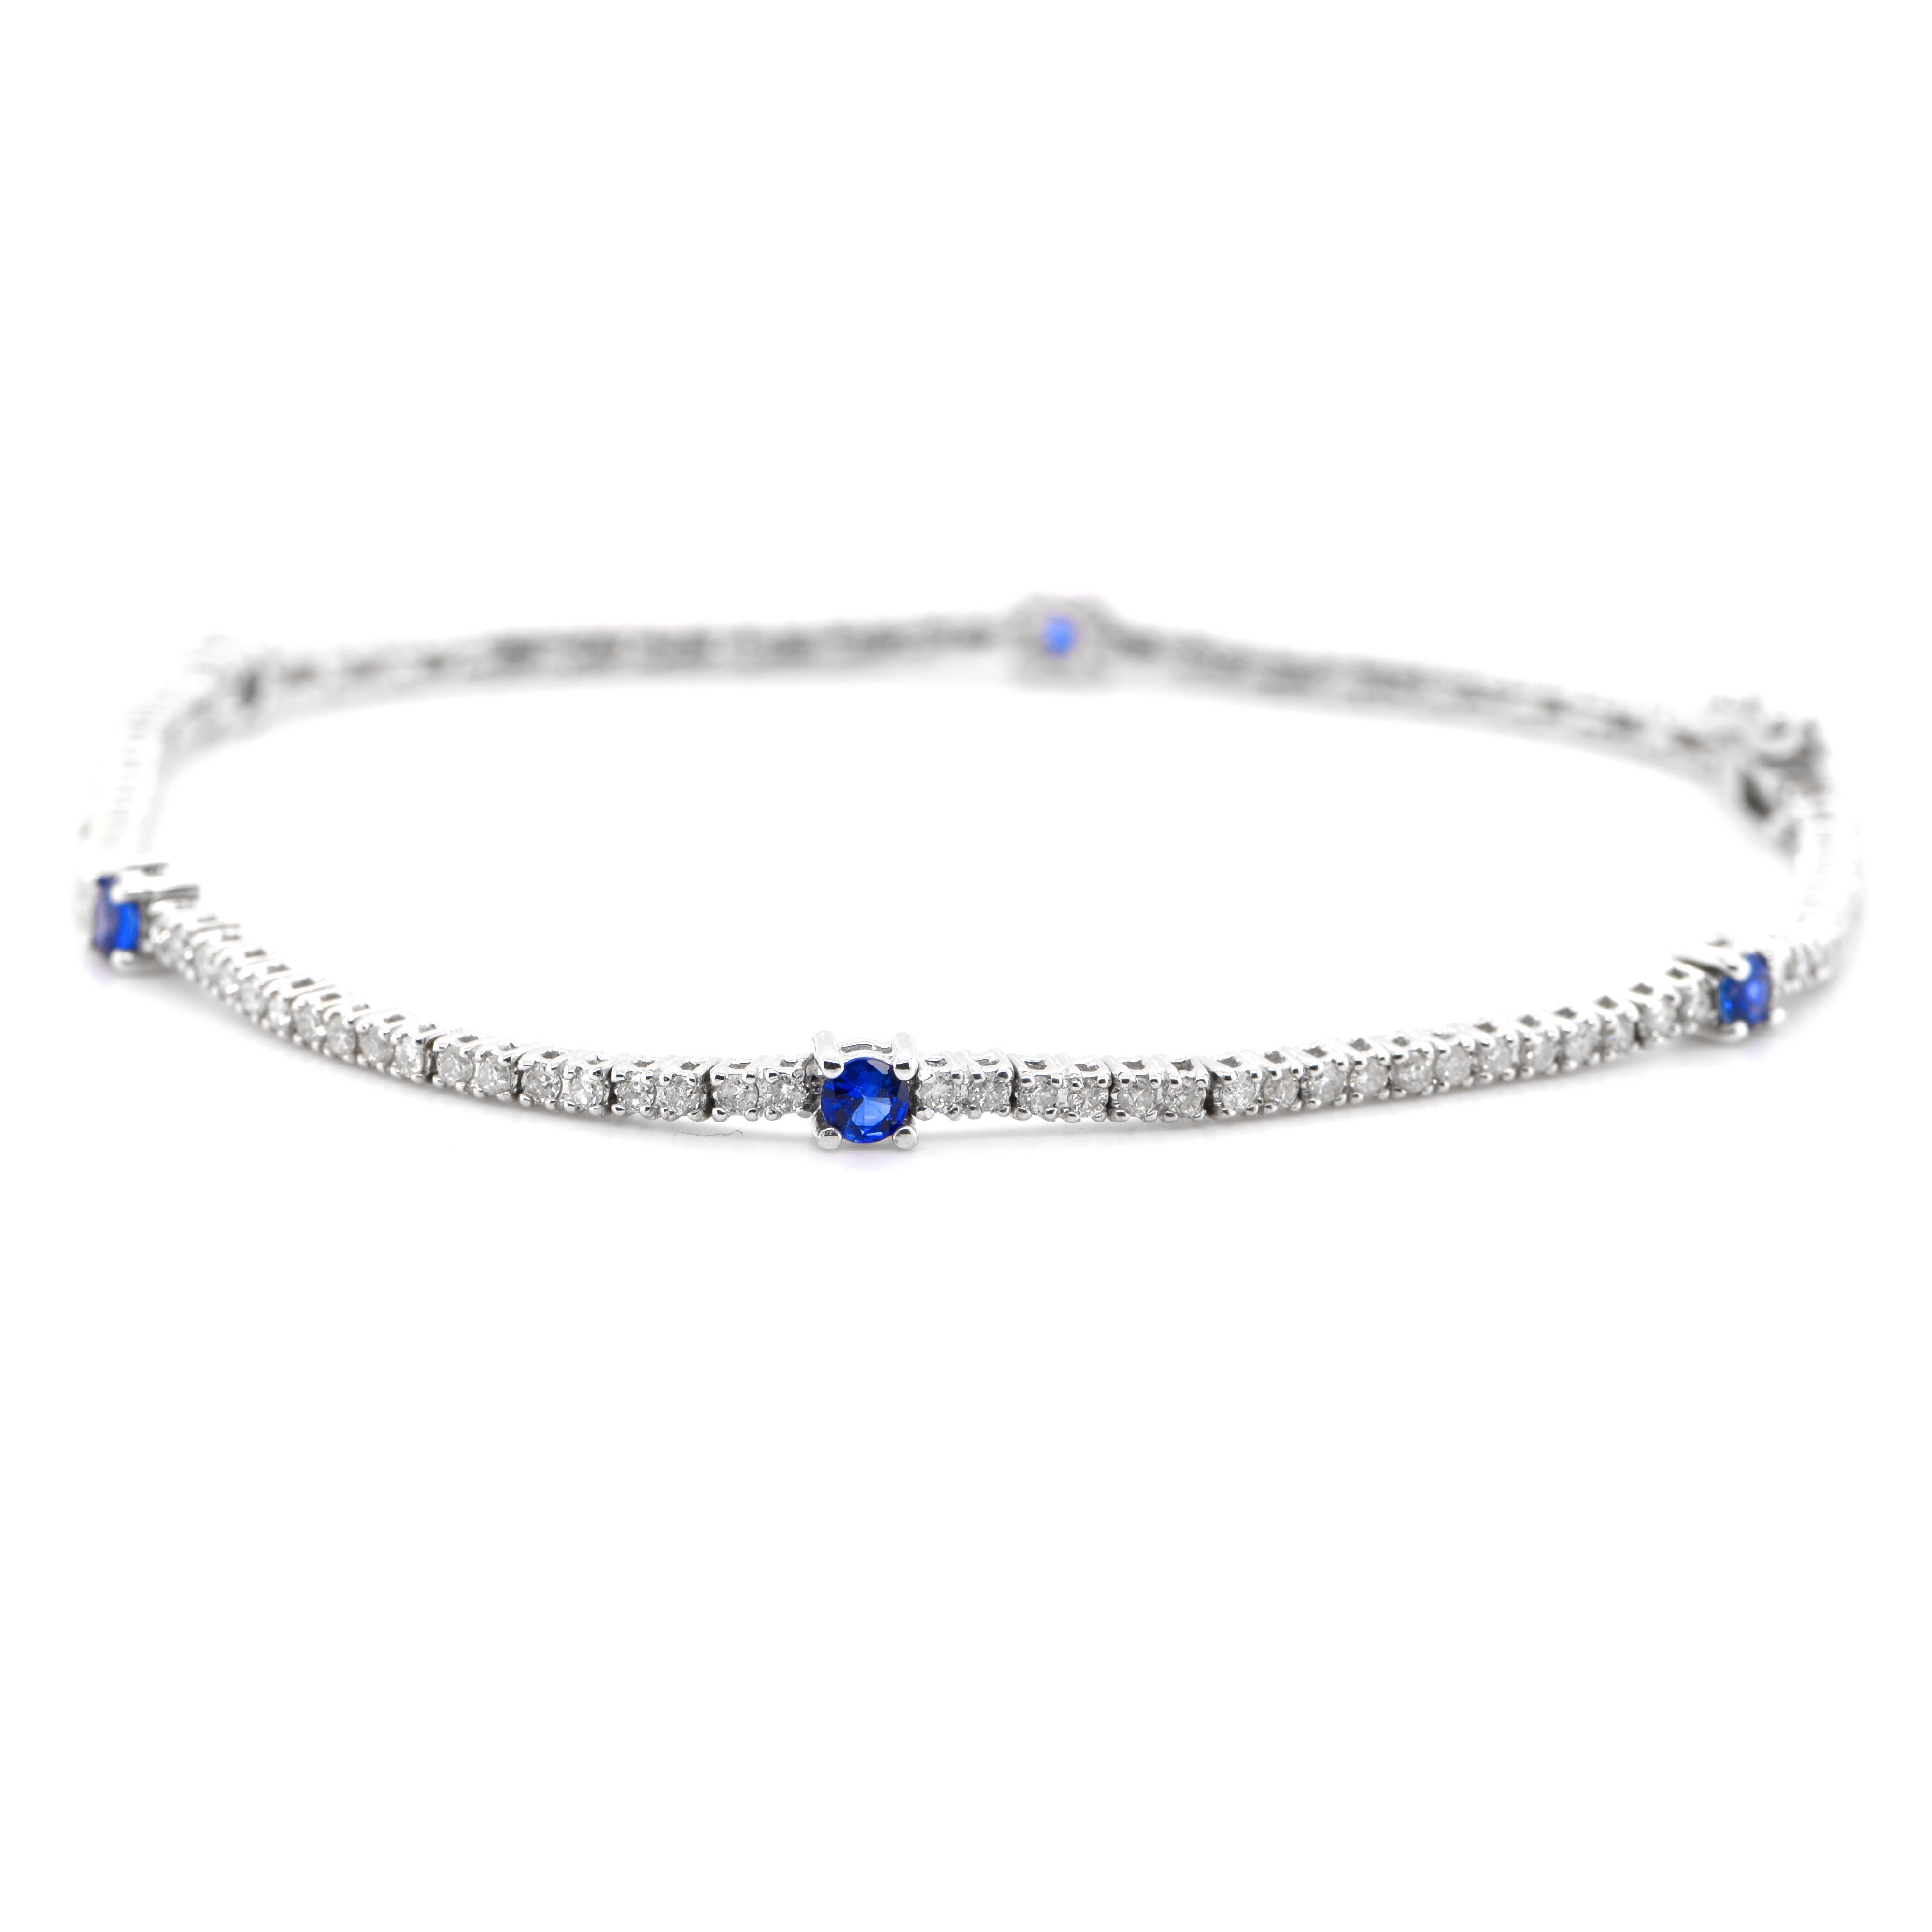 A beautiful Tennis Bracelet featuring a total of 0.40 Carats of Natural Sapphires and 0.95 Carats of Diamond Accents set in 18 Karat White Gold. The Sapphires are of 4x3mm size. Sapphires have extraordinary durability - they excel in hardness as